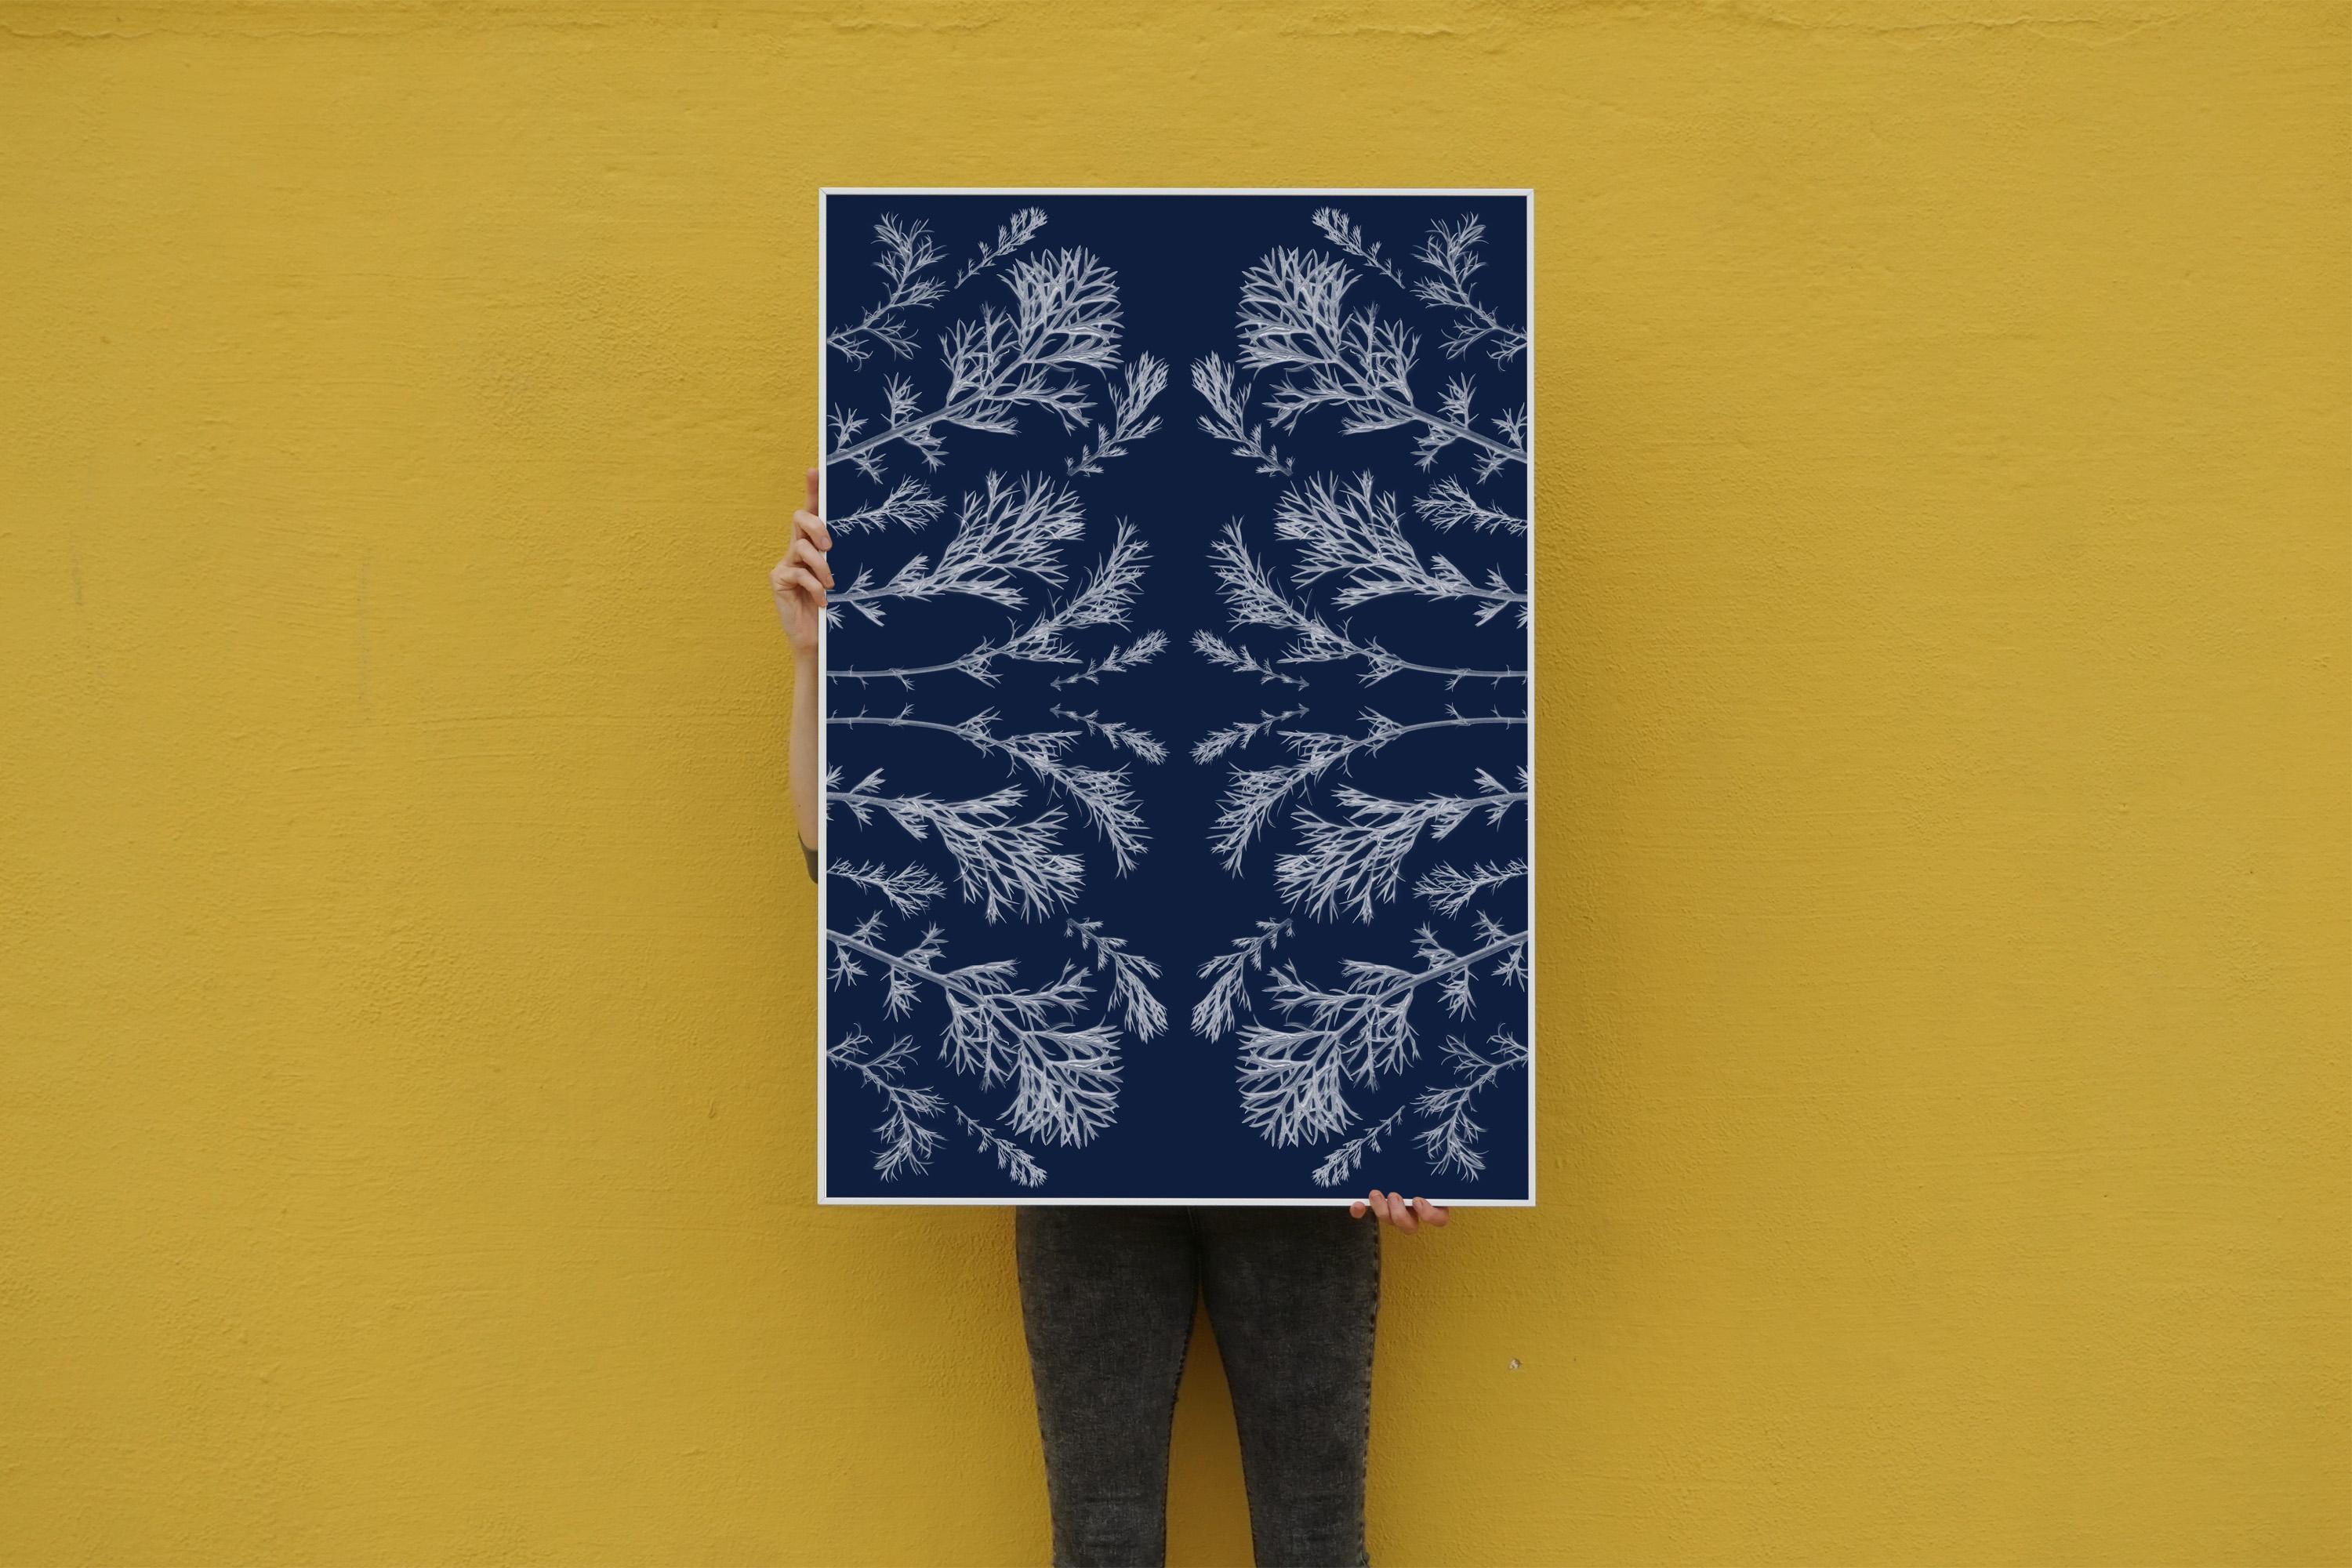 Plant pressed Cyanotype, Kaleidoscopic, Handmade in Sunlight, Limited Edition  - American Modern Print by Kind of Cyan